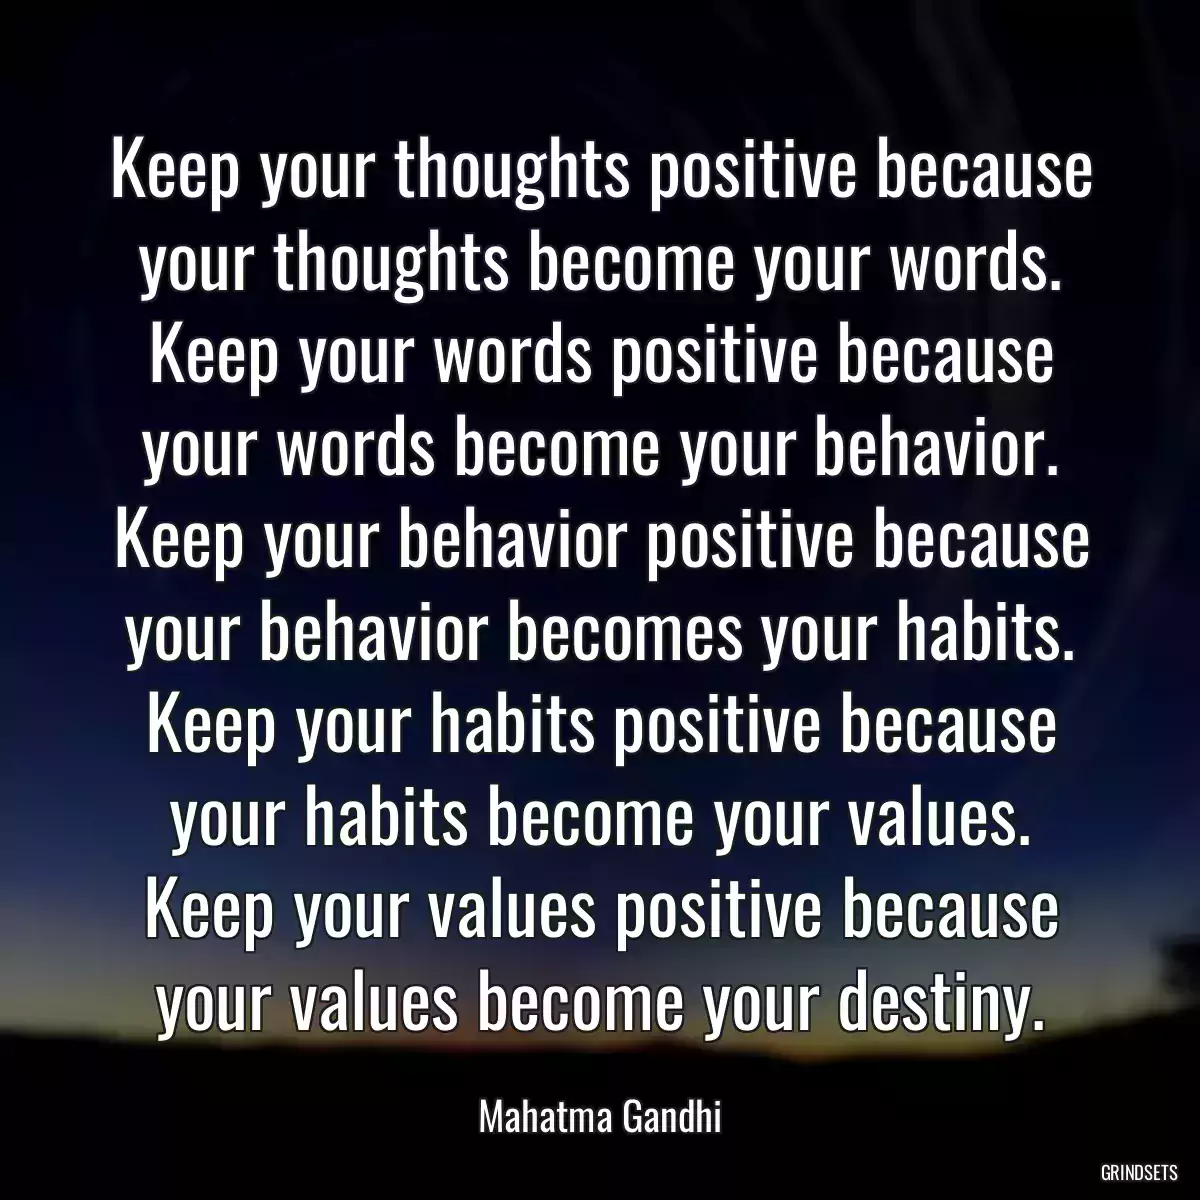 Keep your thoughts positive because your thoughts become your words. Keep your words positive because your words become your behavior. Keep your behavior positive because your behavior becomes your habits. Keep your habits positive because your habits become your values. Keep your values positive because your values become your destiny.